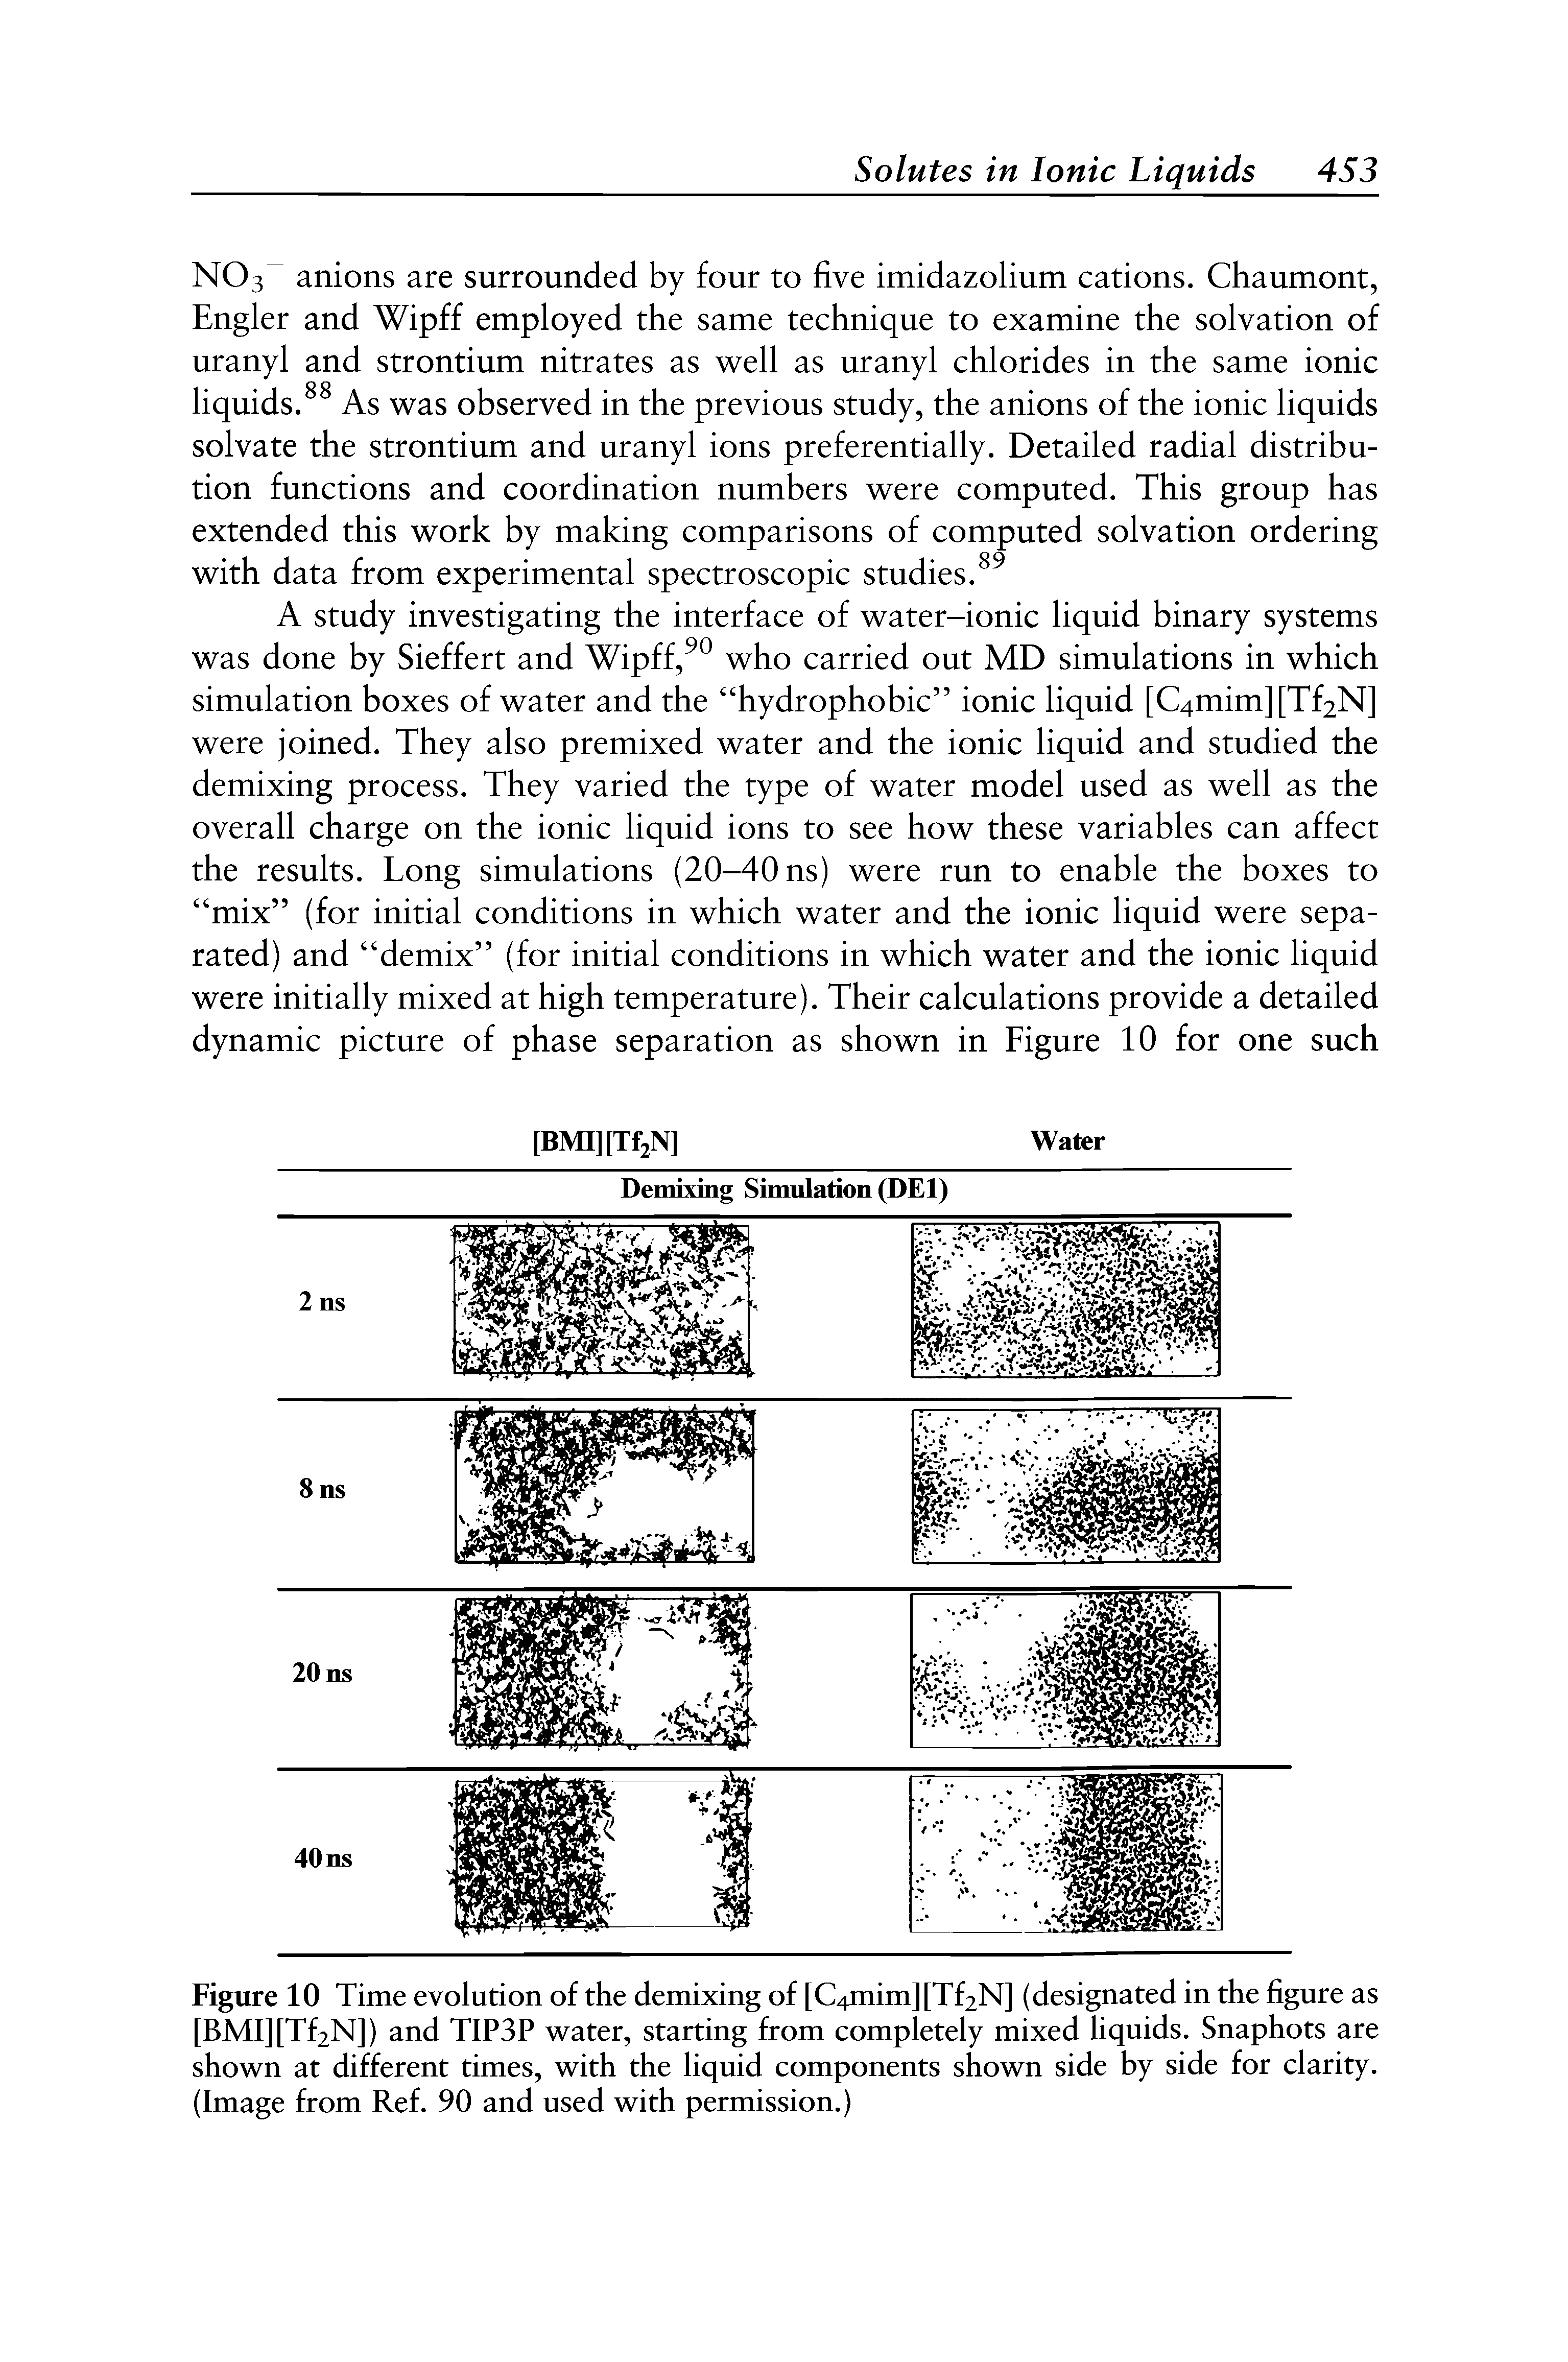 Figure 10 Time evolution of the demixing of [C4mim][Tf2N] (designated in the figure as [BMI][Tf2N]) and TIP3P water, starting from completely mixed liquids. Snaphots are shown at different times, with the liquid components shown side by side for clarity. (Image from Ref. 90 and used with permission.)...